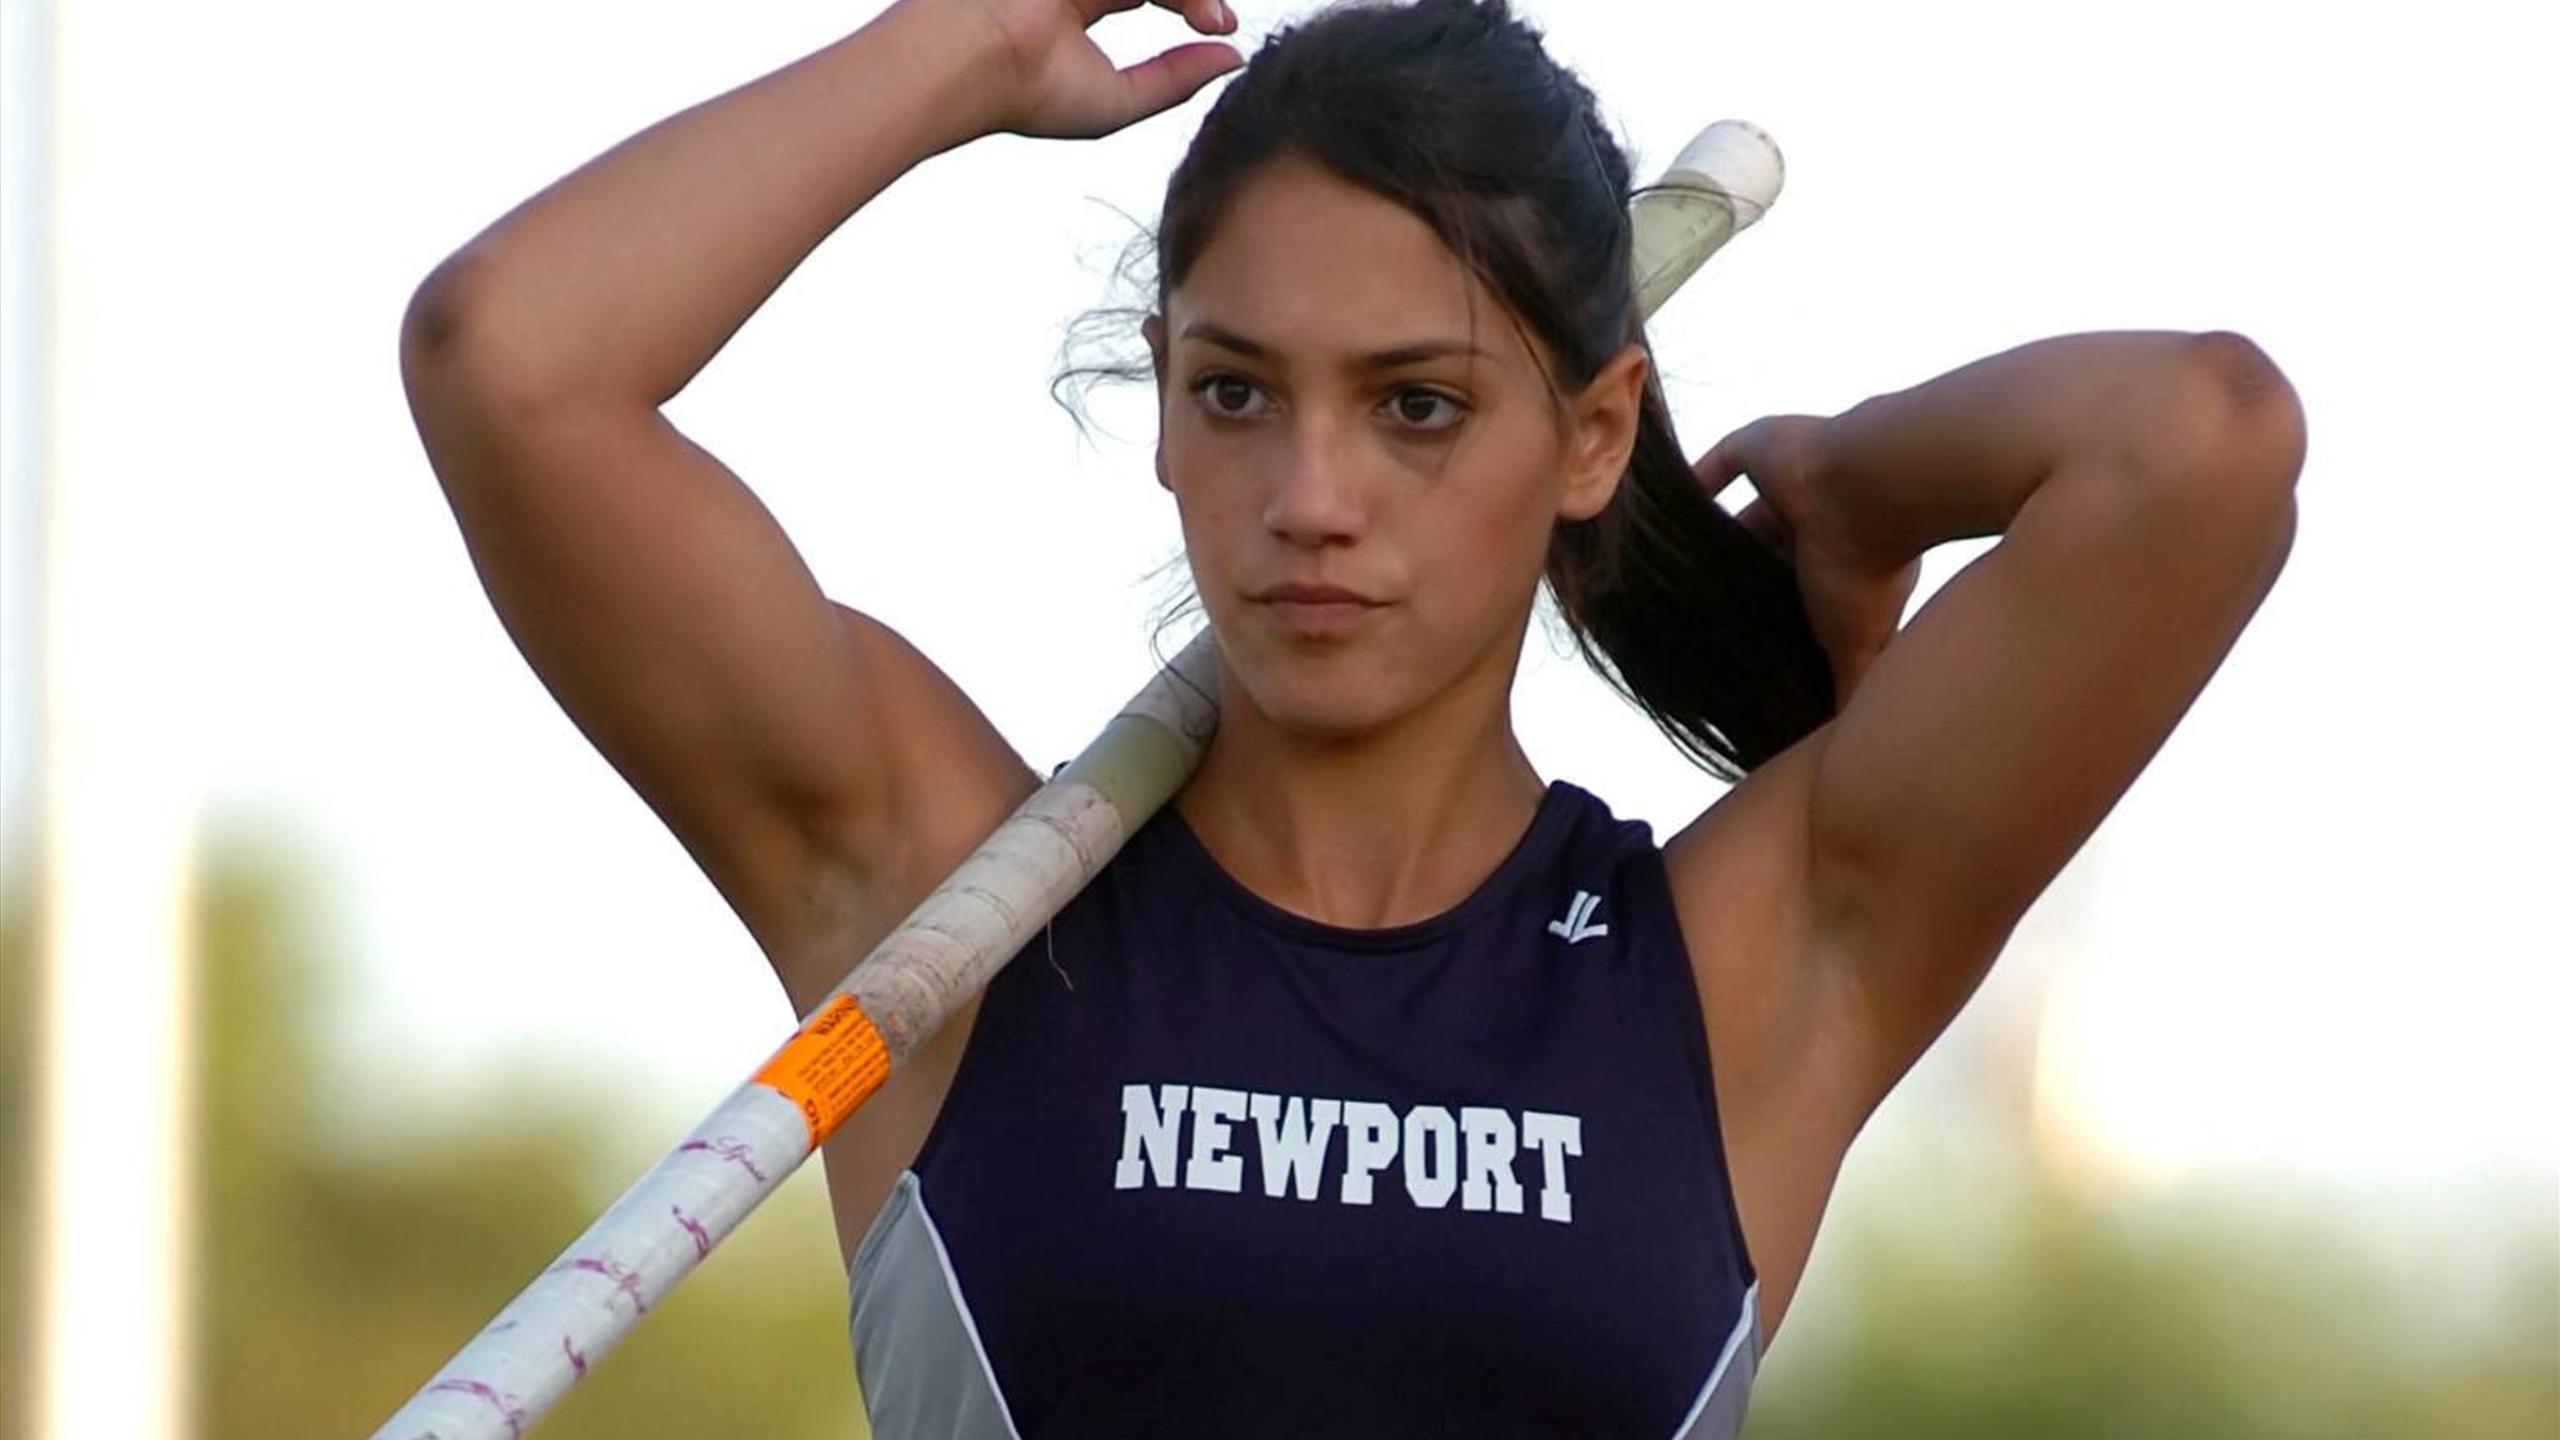 30 Hot And Almost Nude Allison Stokke Photos.